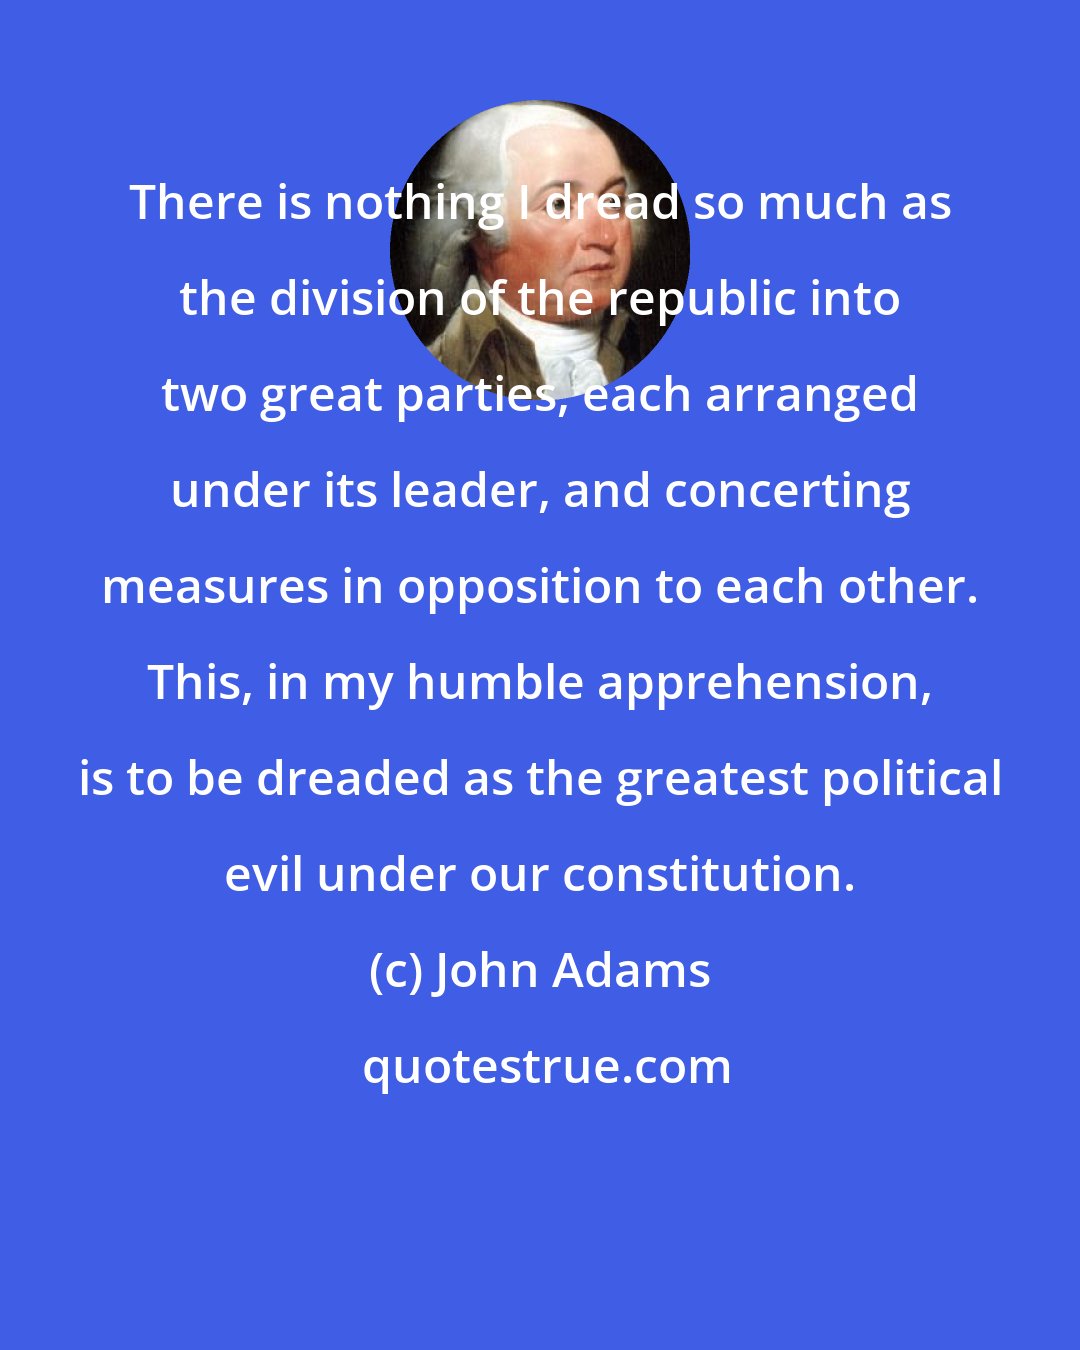 John Adams: There is nothing I dread so much as the division of the republic into two great parties, each arranged under its leader, and concerting measures in opposition to each other. This, in my humble apprehension, is to be dreaded as the greatest political evil under our constitution.